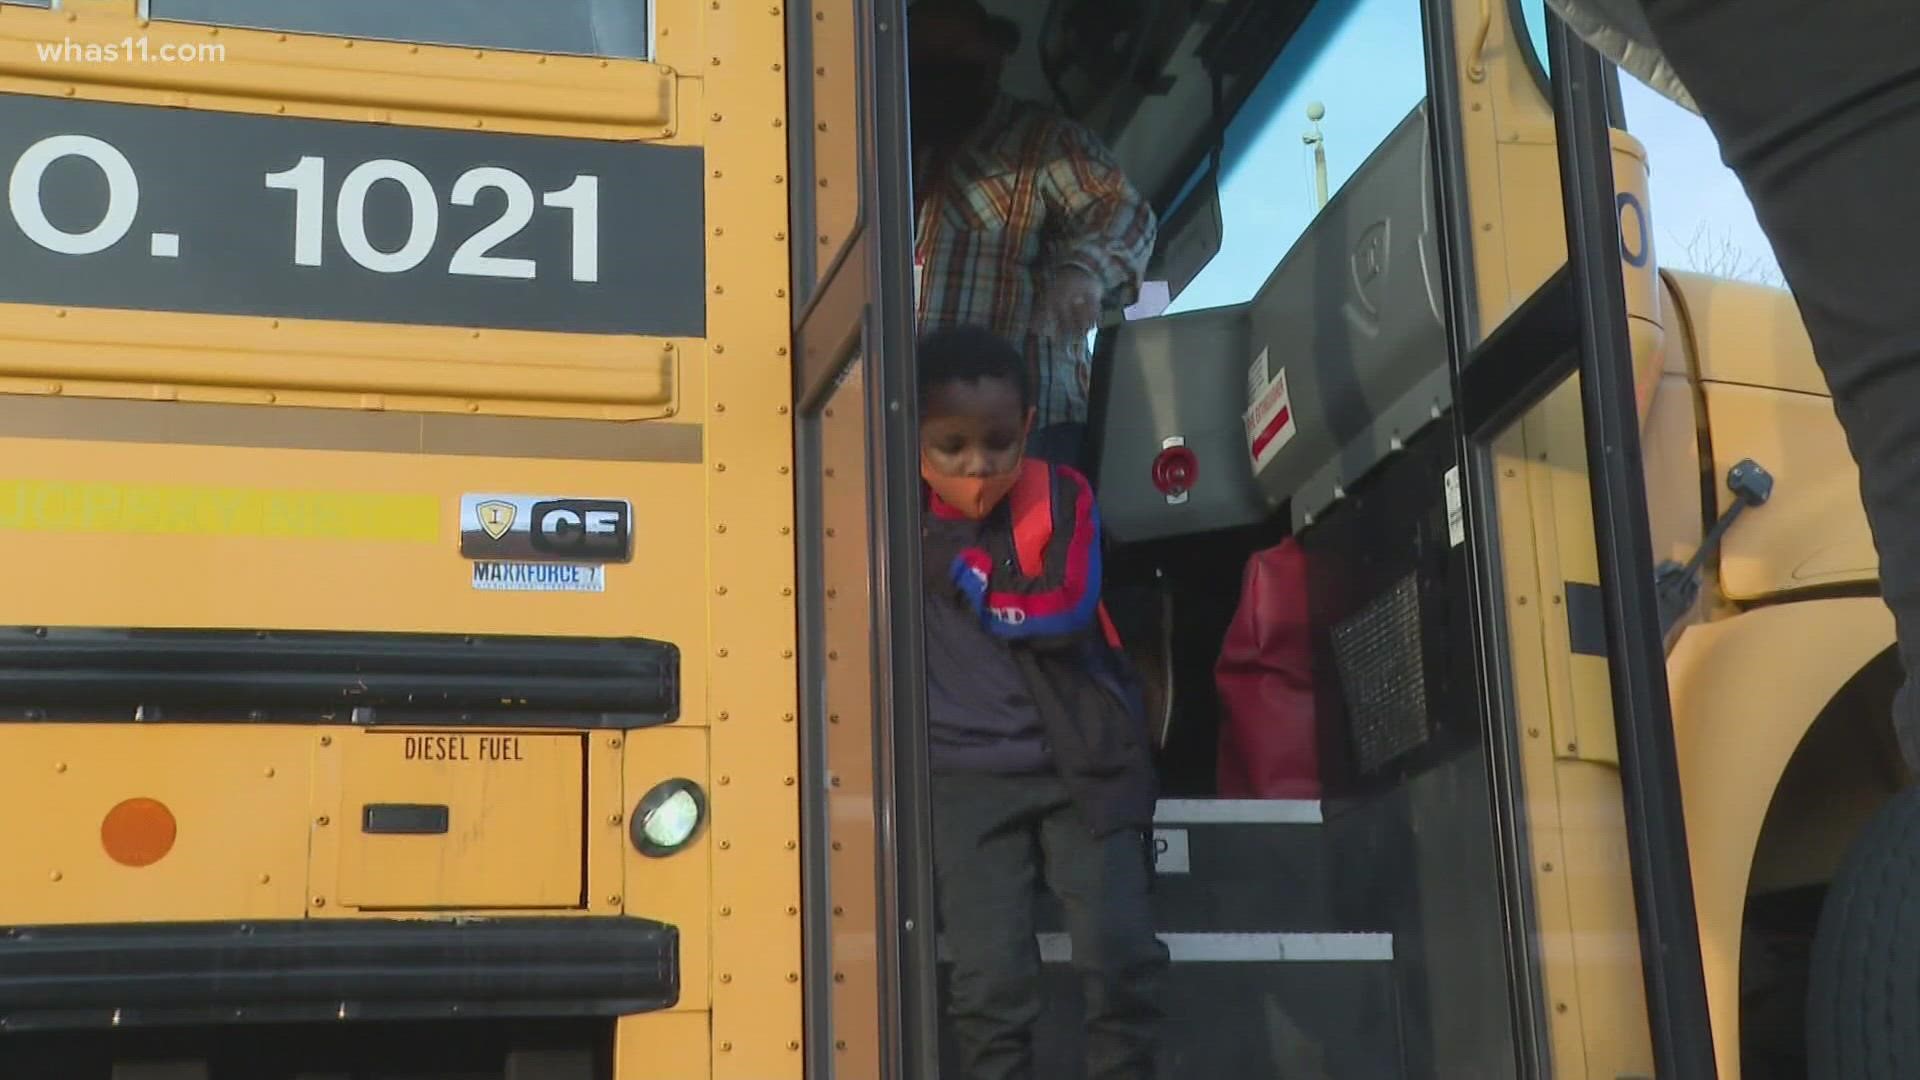 Some districts around the states are grappling with shortages of key positions, including bus drivers. FOCUS investigates why this job is in high demand.